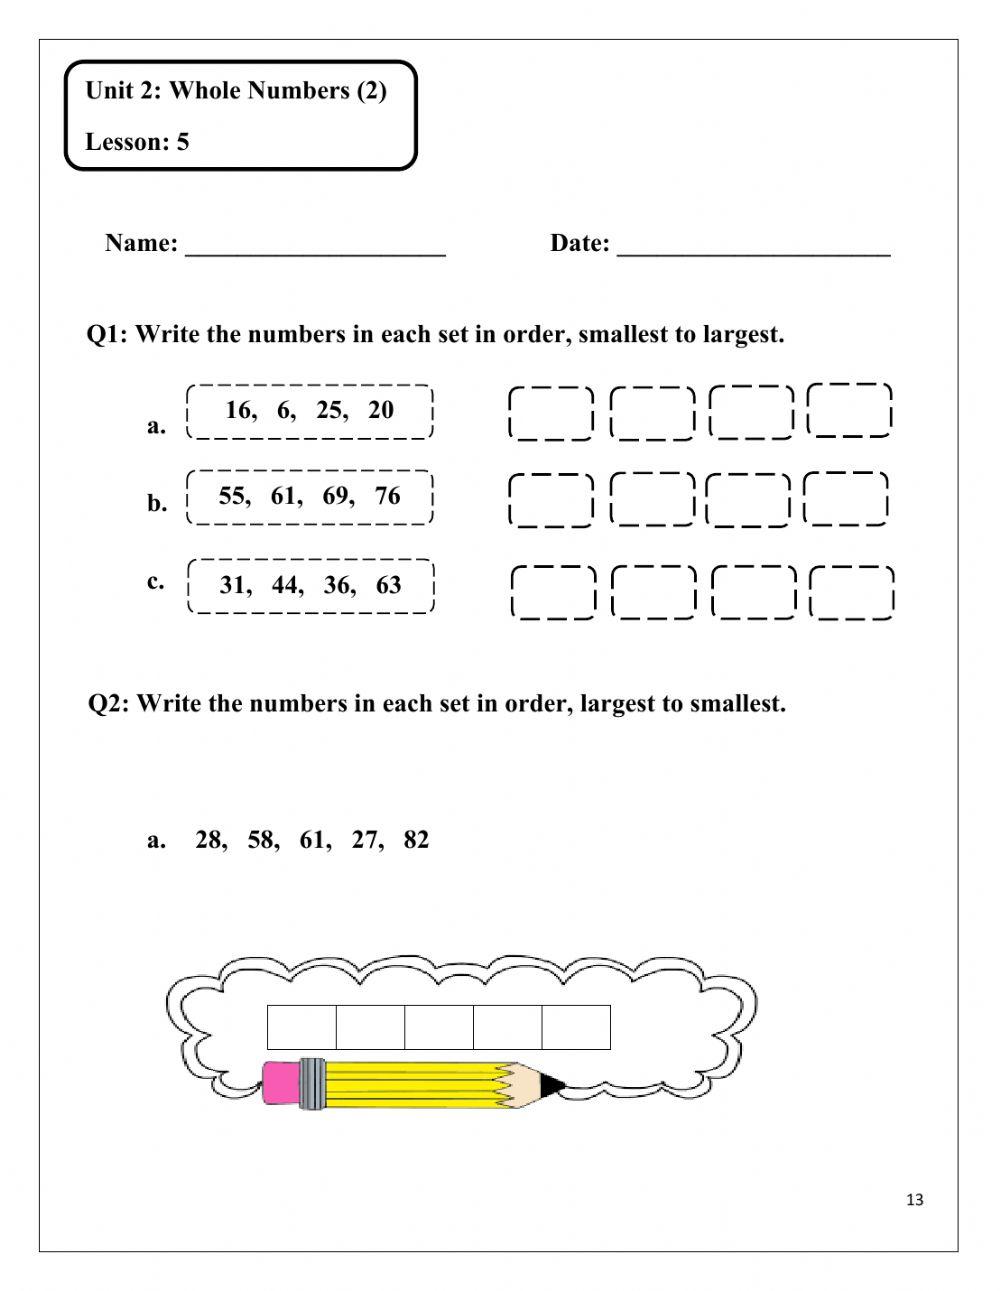 Unit 2 lesson 5 and 6